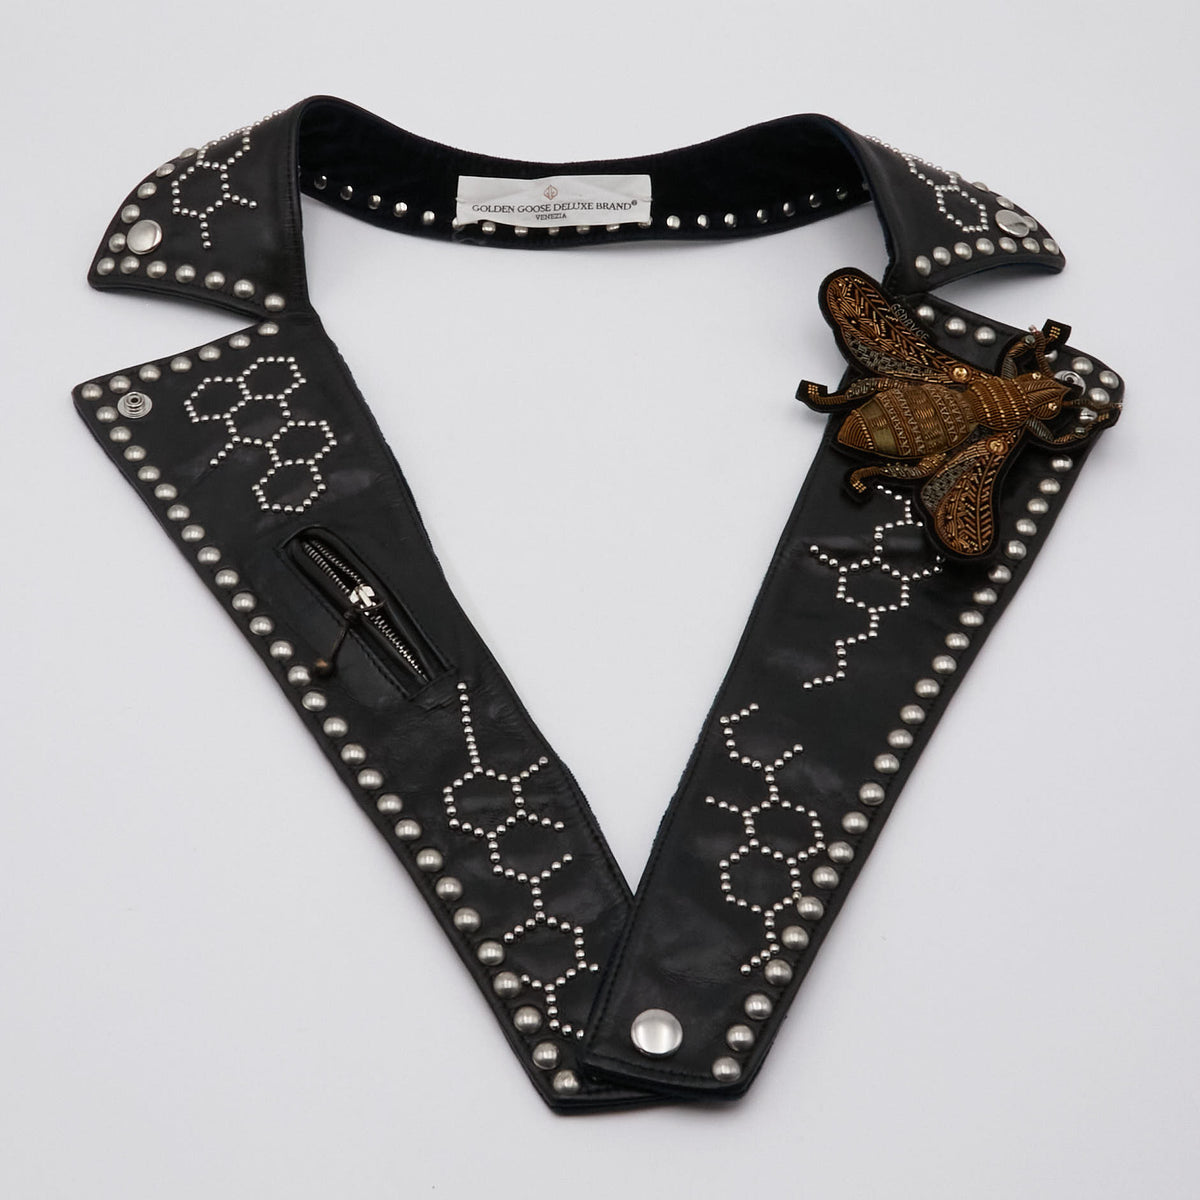 Golden Goose Leather Collar with Studs and brooch pin